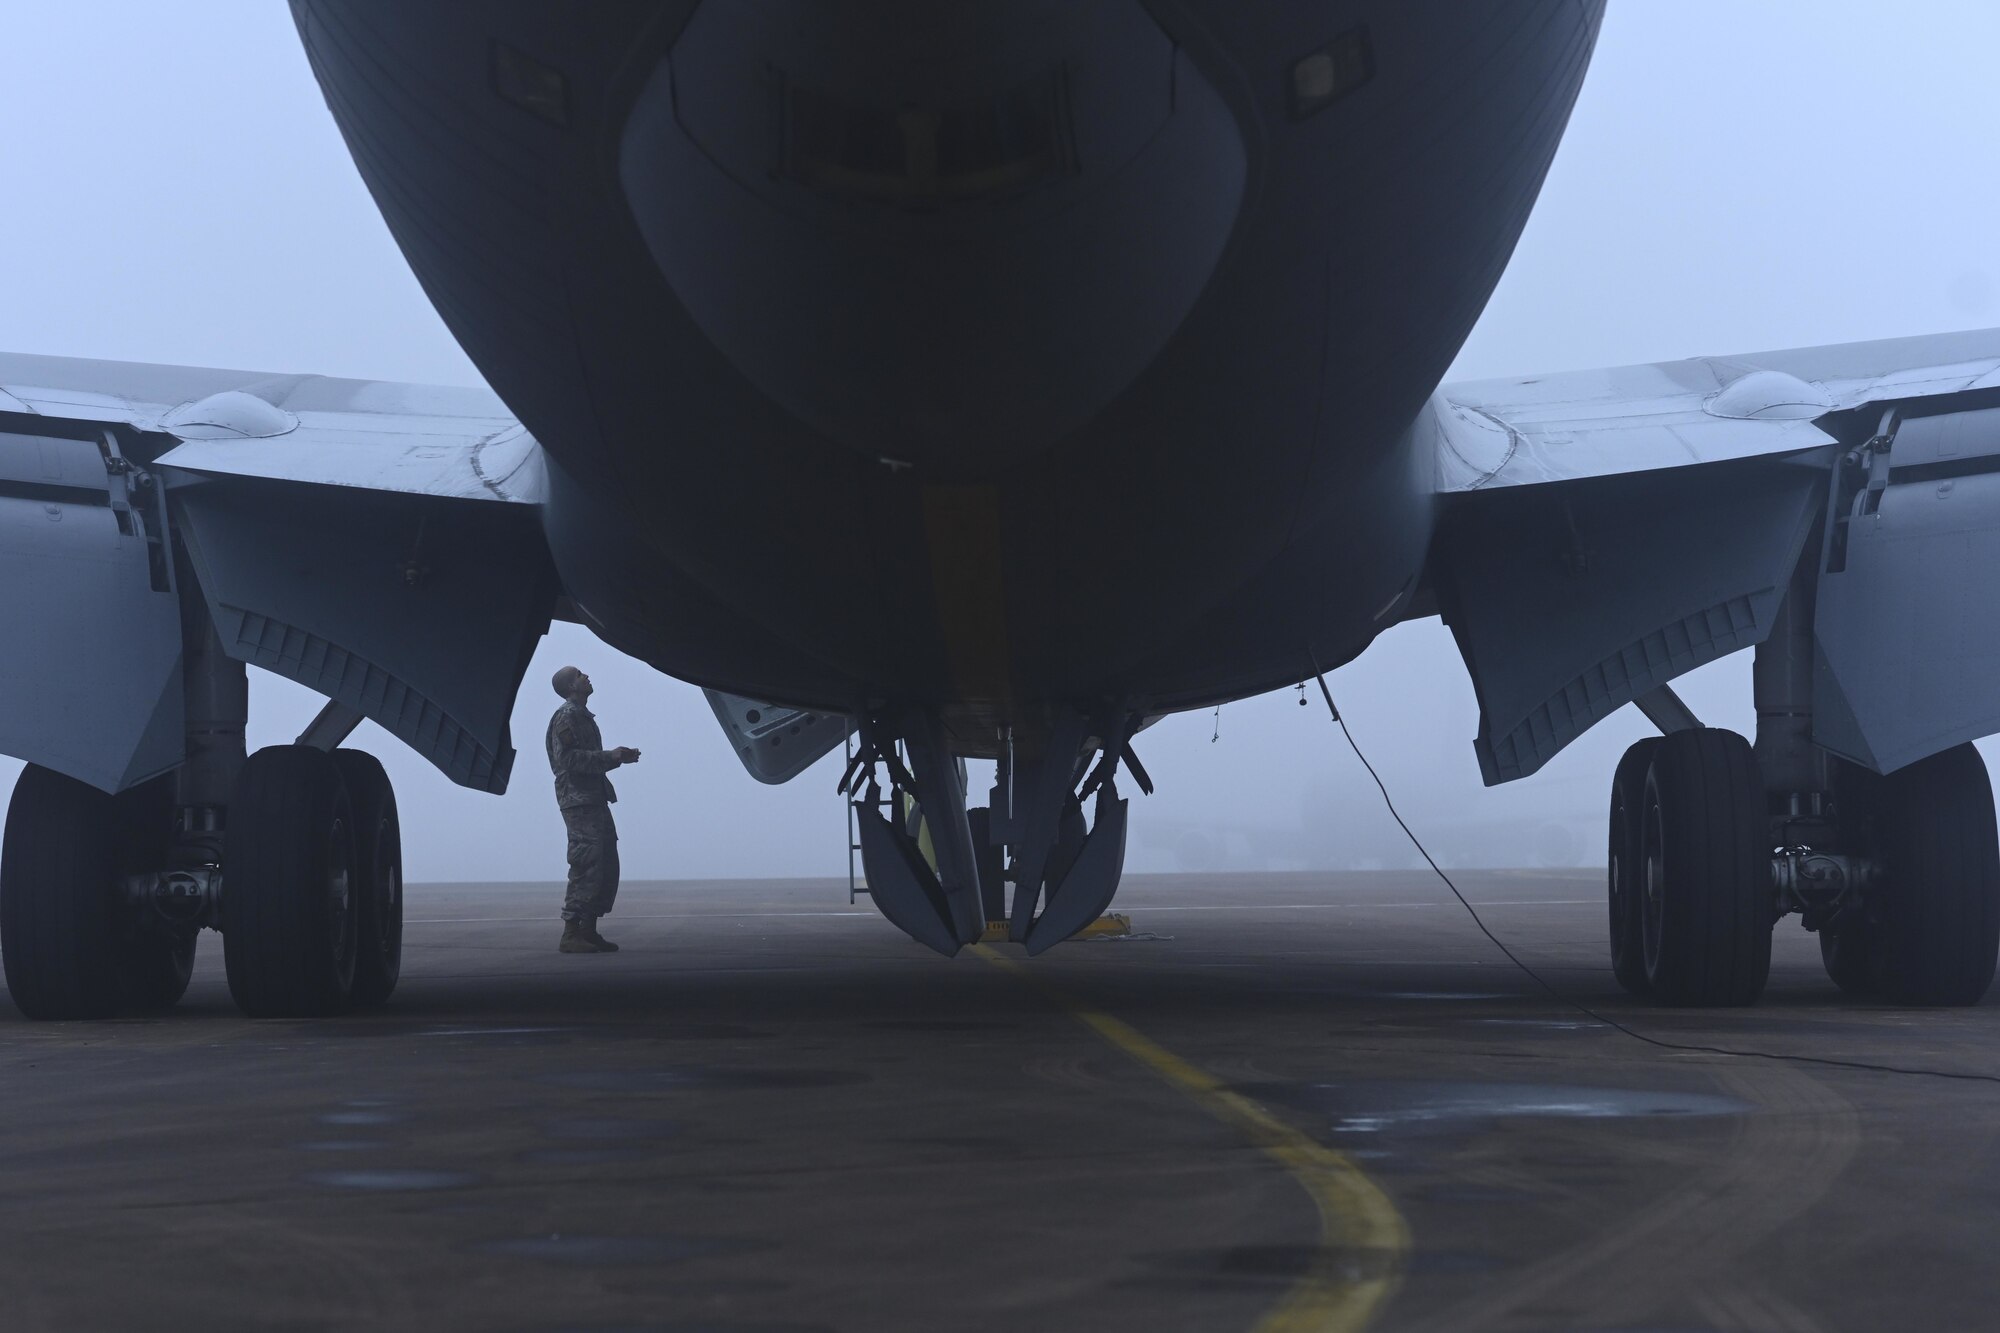 A U.S. Airman assigned to the 100th Air Refueling Wing listens to instructions from an aircrew member before boarding a KC-135 Stratotanker aircraft during exercise High Life at Royal Air Force Fairford, England, Sept. 16, 2021. U.S. agility, deterrence, and resiliency are essential to defense and operational capability in a contested environment. (U.S. Air Force photo by Senior Airman Joseph Barron)